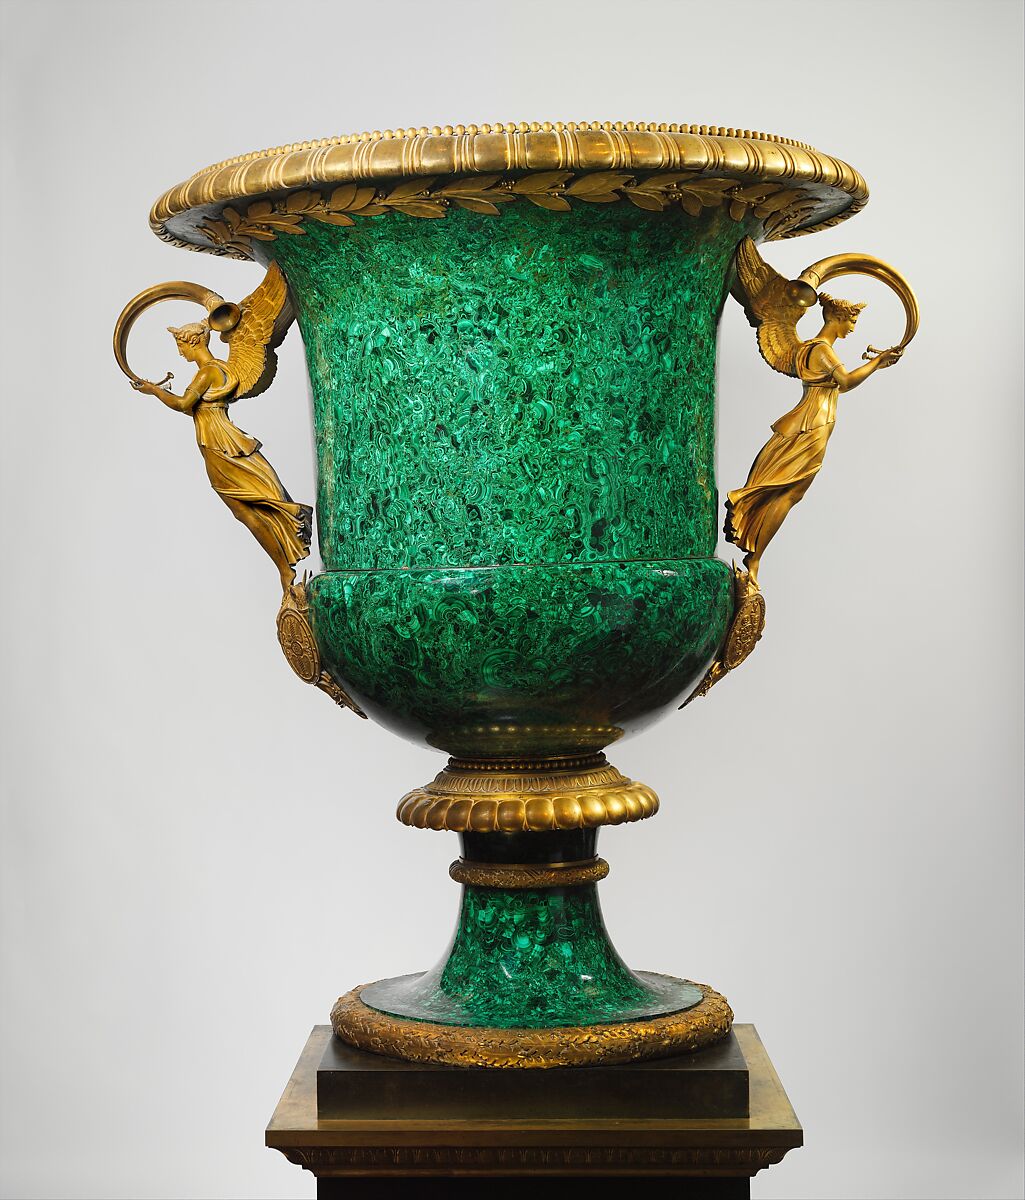 Monumental vase, Pedestal and mounts by Pierre Philippe Thomire (French, Paris 1751–1843 Paris), Russian malachite, composite filling material; gilt-bronze mounts; bronze pedestal, probably Italian, Florence and French, Paris 